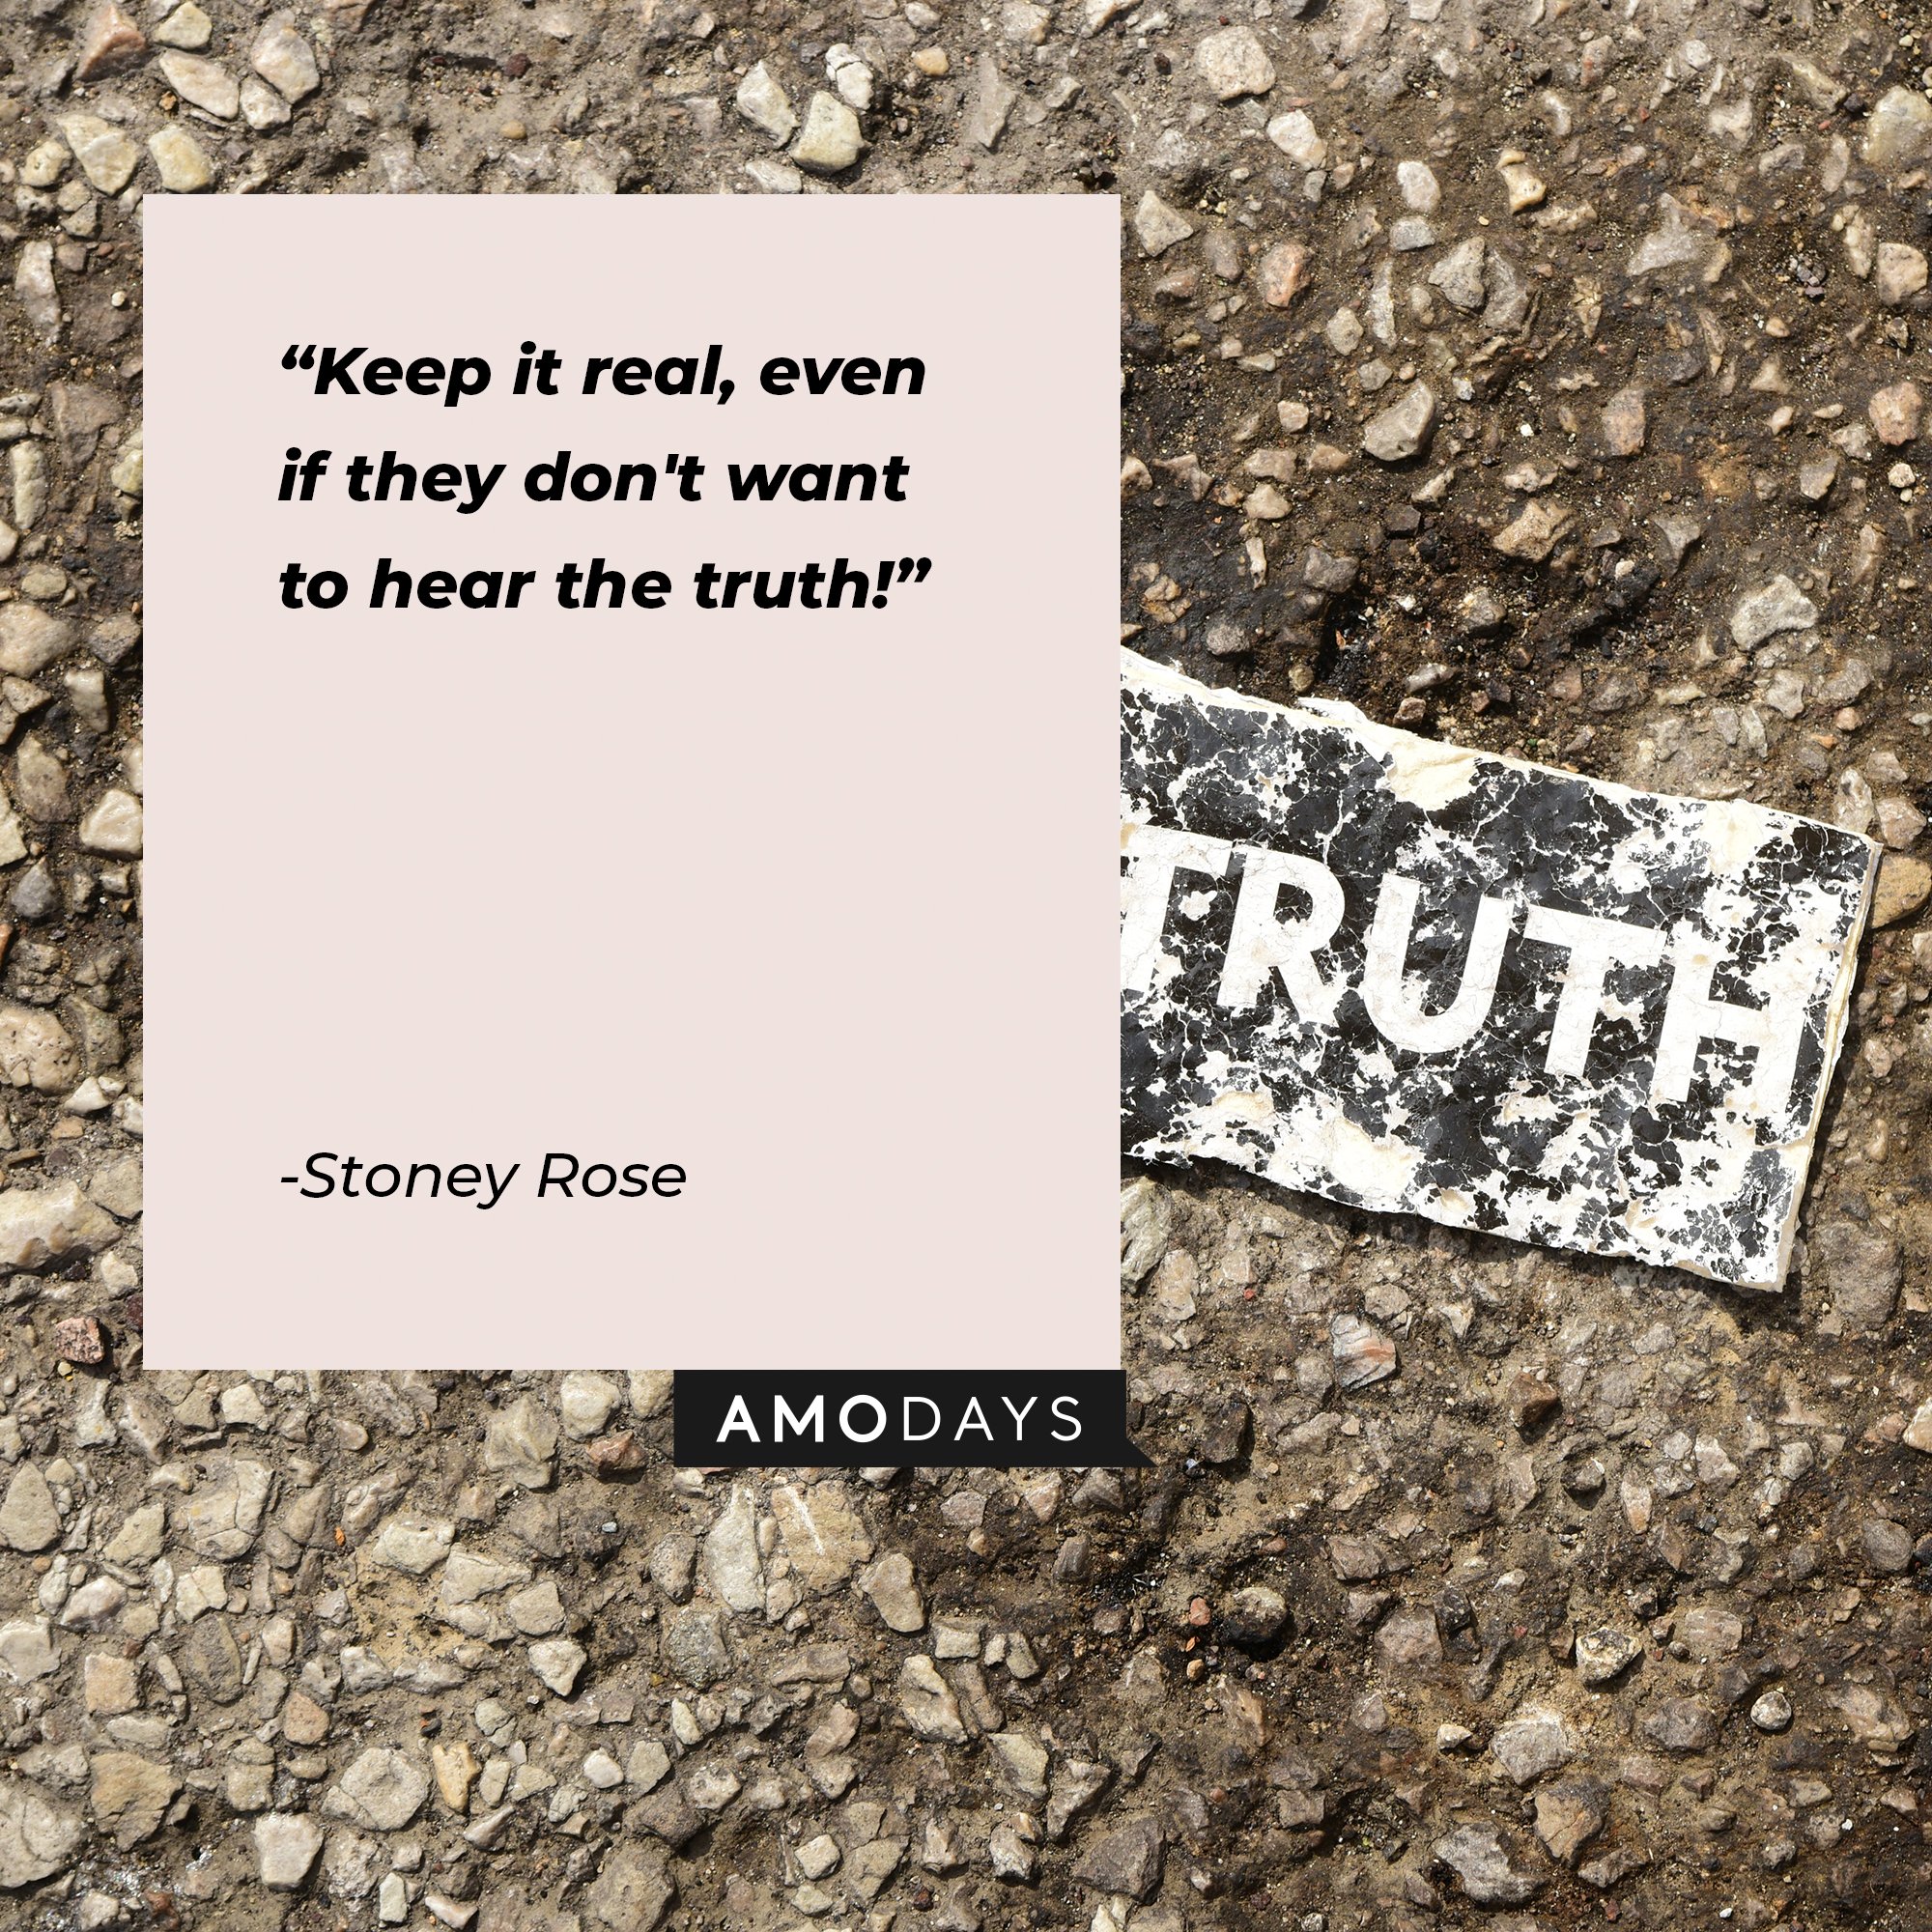 Stoney Rose’s quote: "Keep it real, even if they don't want to hear the truth!" | Image: AmoDays